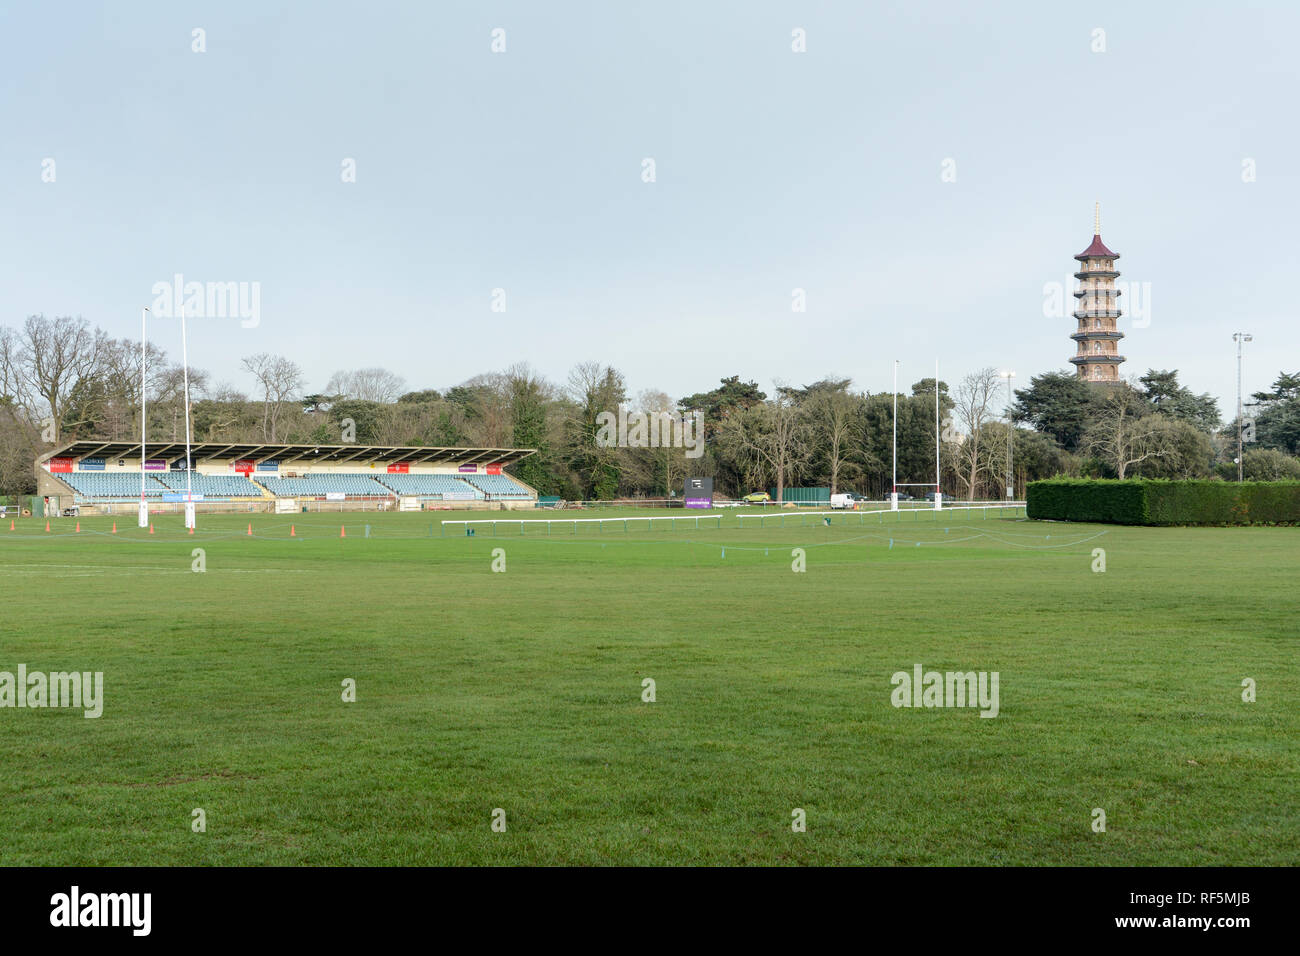 London Welsh Old Deer Park rugby Ground, Richmond, Londra, Inghilterra, Regno Unito Foto Stock